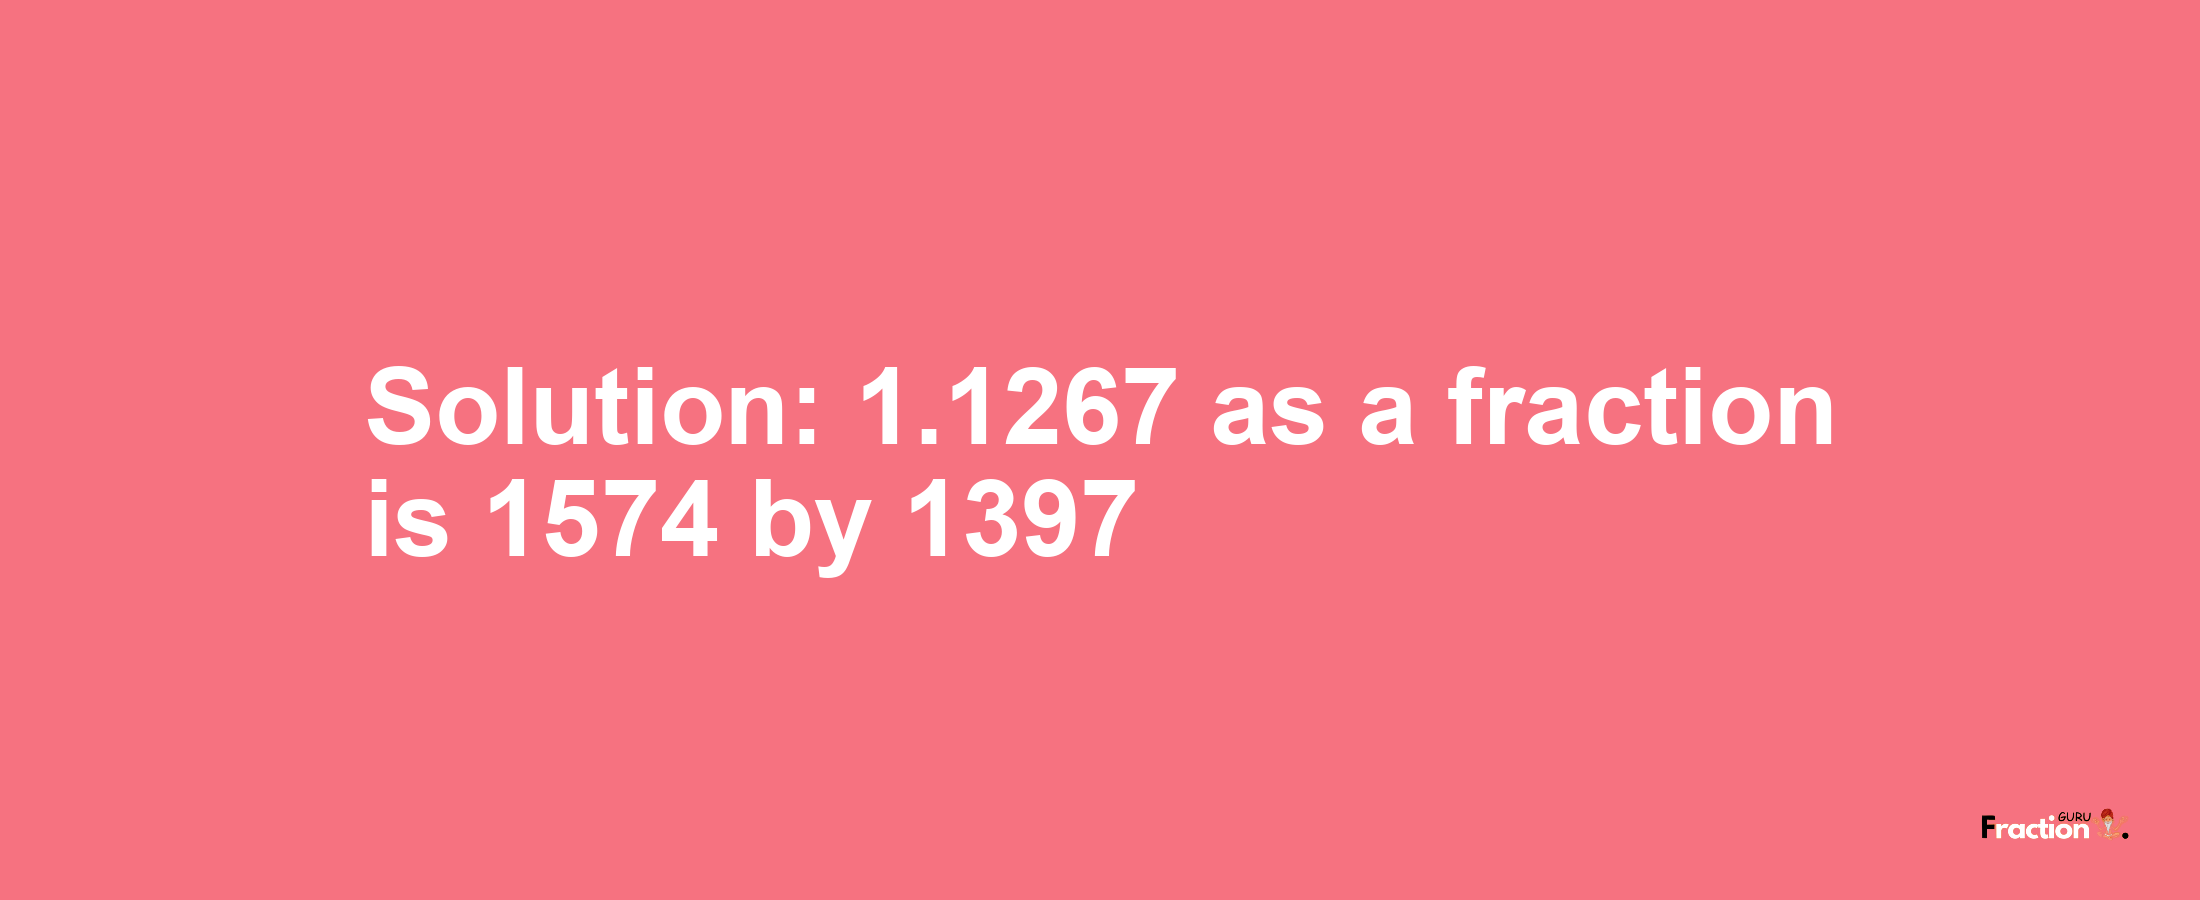 Solution:1.1267 as a fraction is 1574/1397